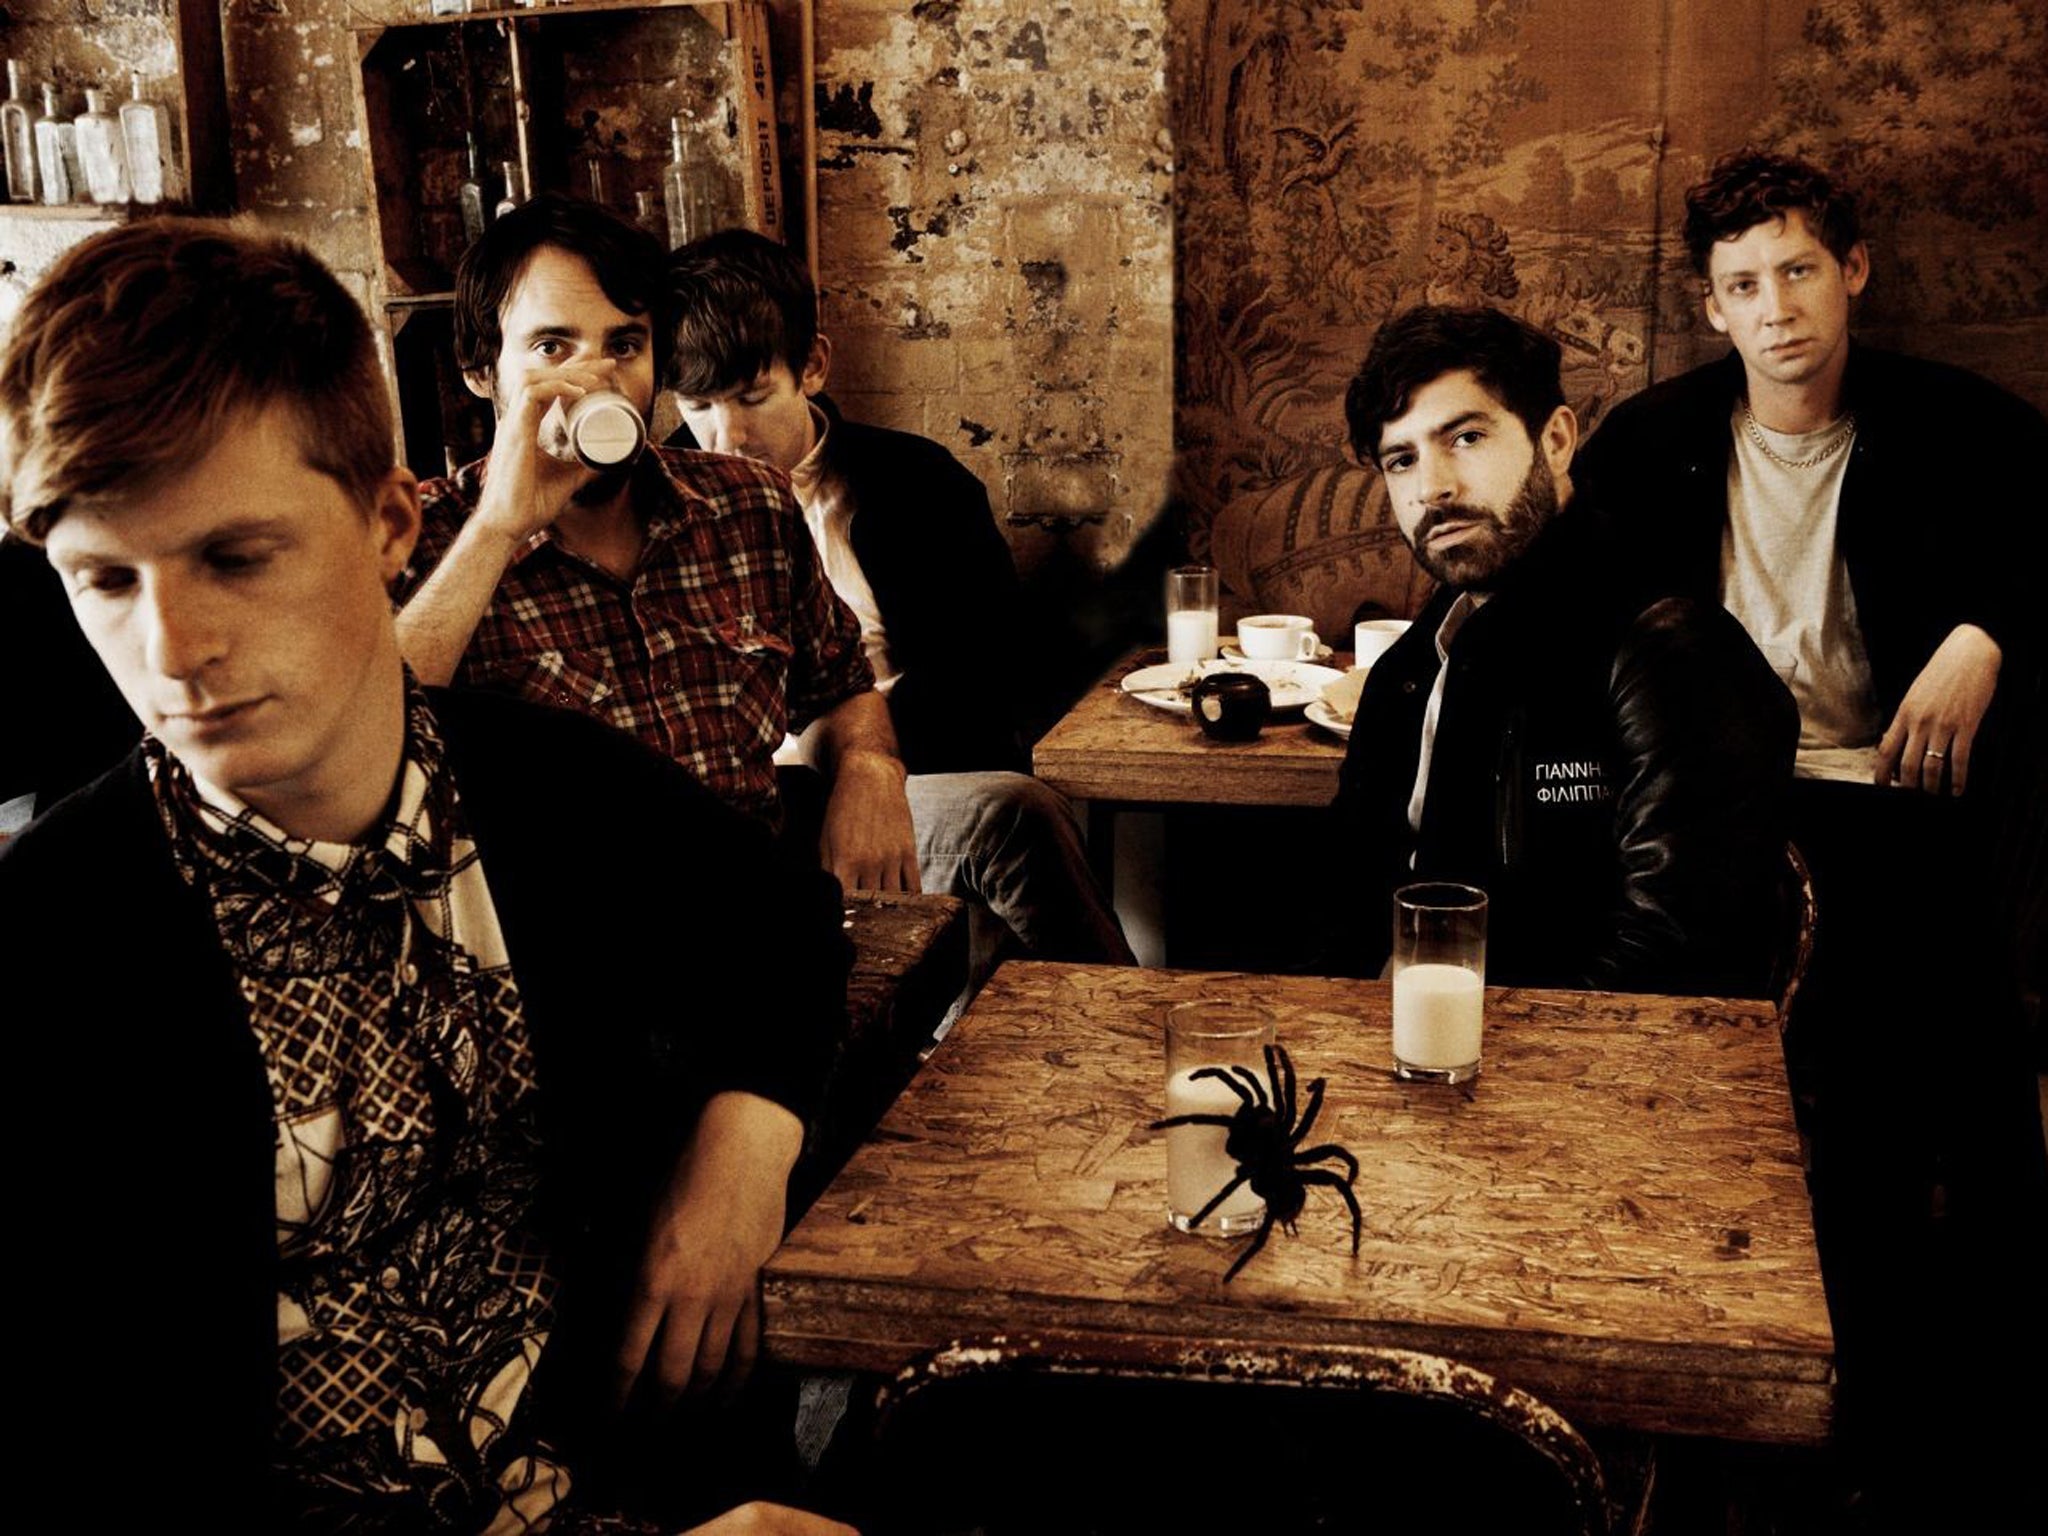 Café society: Jack Bevan, Jimmy Smith, Edwin Congreave, Yannis Philippakis and Walter Gervers of Foals